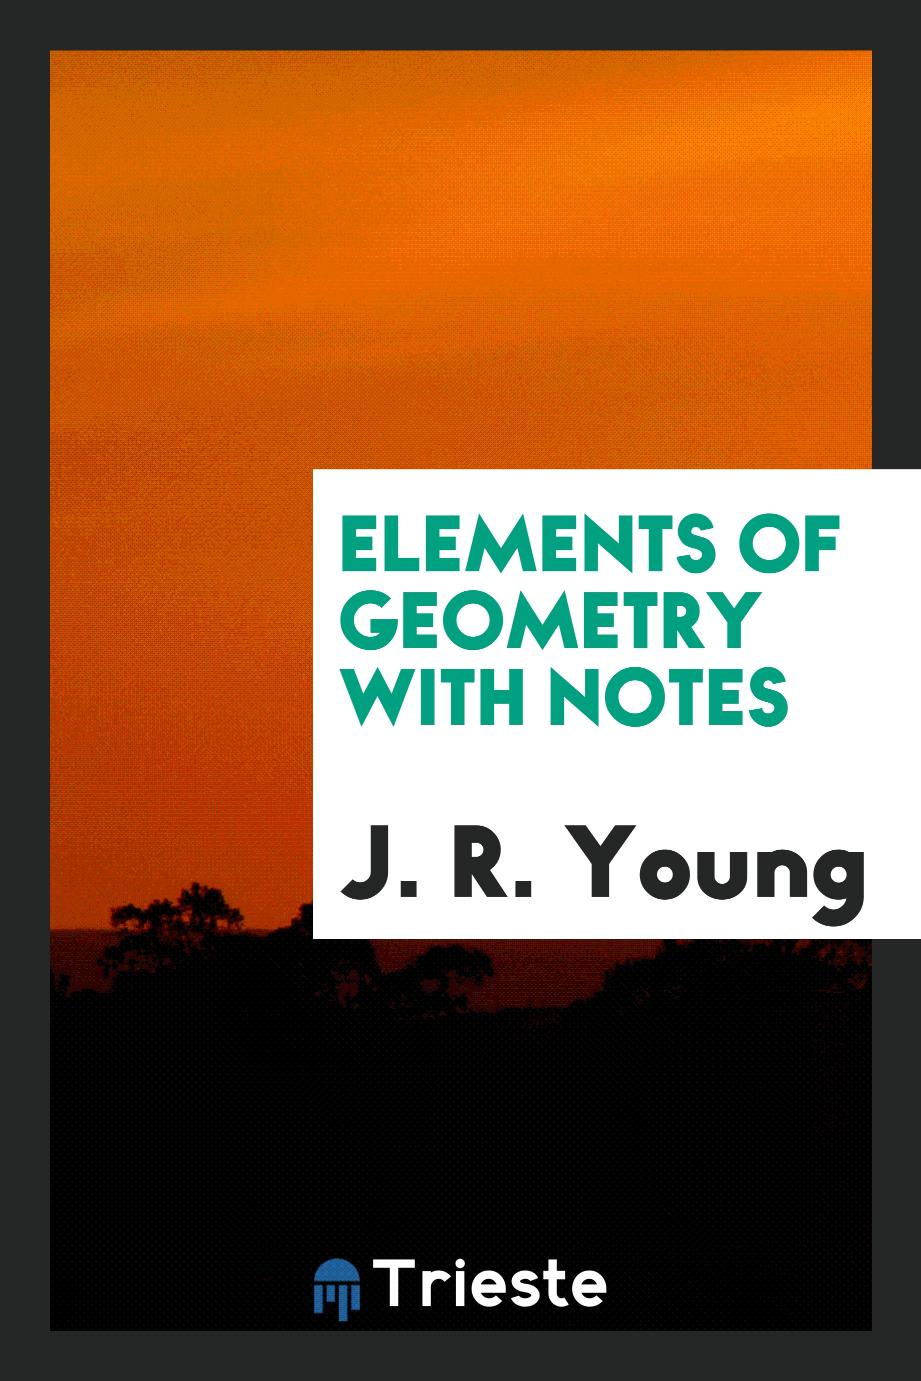 Elements of Geometry with Notes